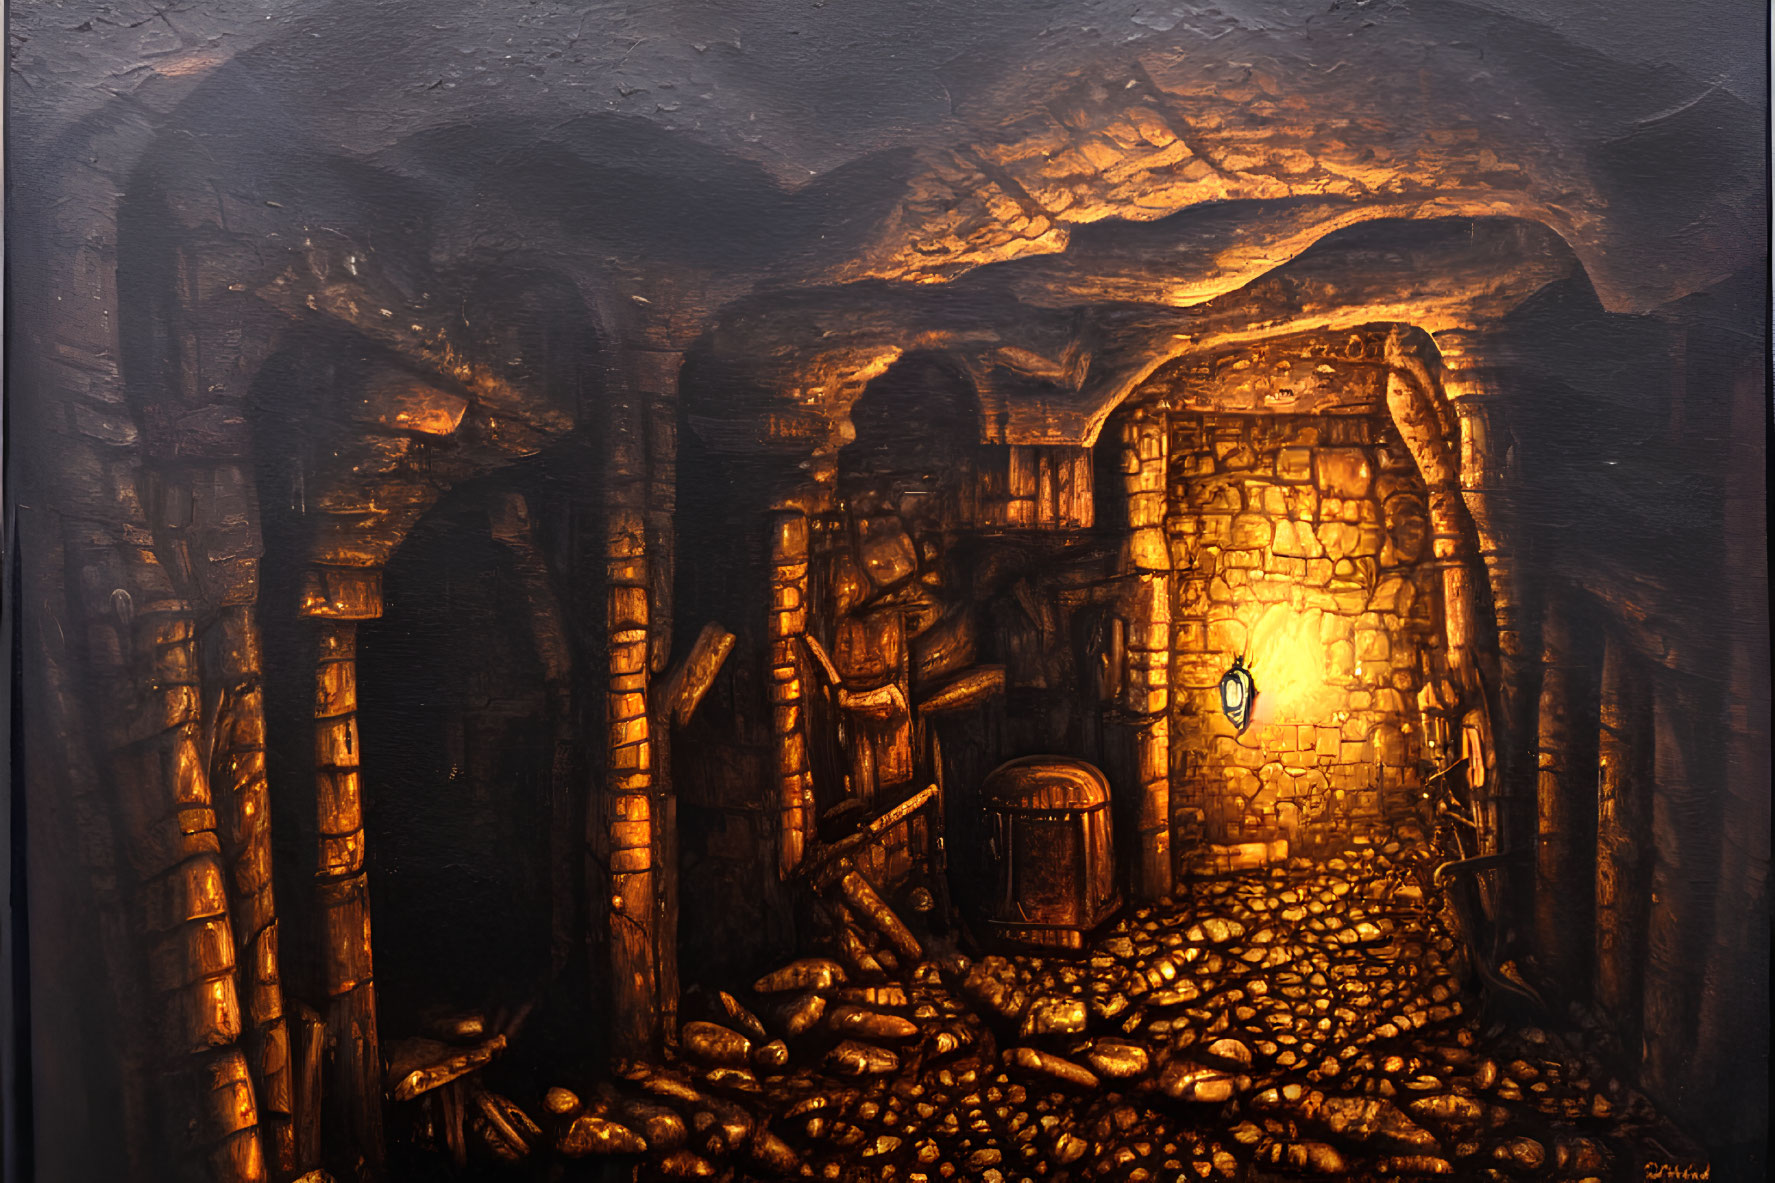 Dimly Lit Stone Dungeon with Arched Gateway and Lantern